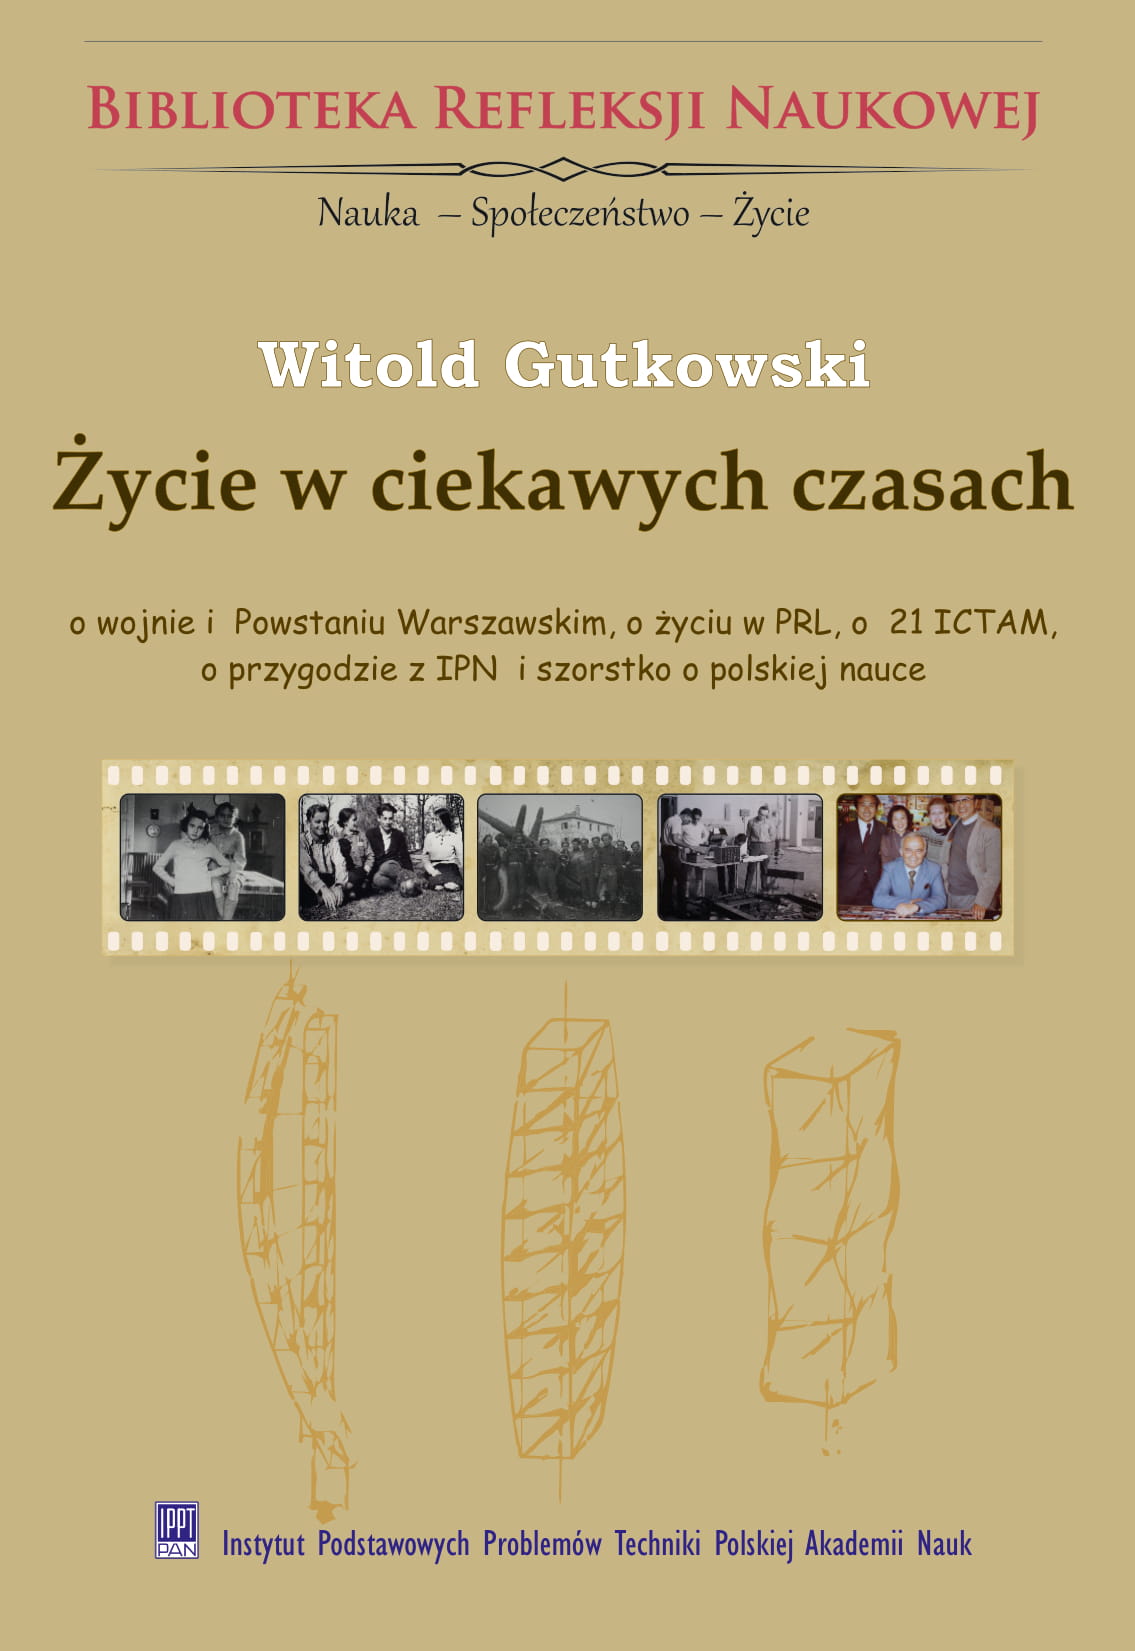 Life in interesting times: about the war and the Warsaw Uprising, about life in the Polish Peoples Republic, about ICTAM 21, about the adventure with the Institute of National Remembrance and roughly about Polish science<br />
(in Polish: Życie w ciekawych czasach…)